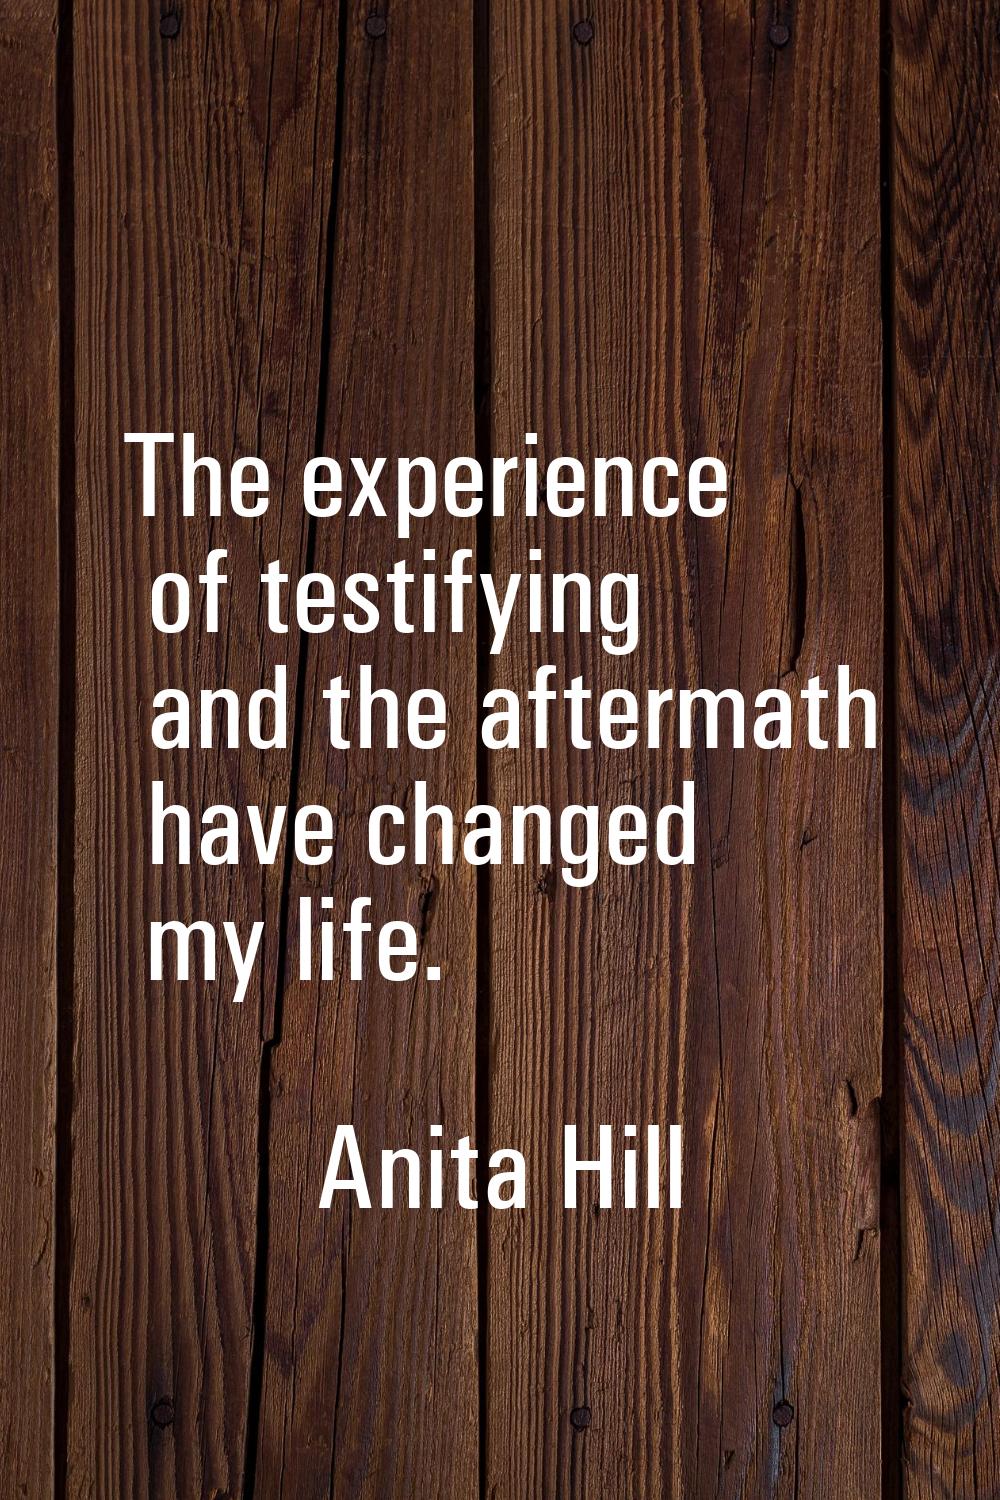 The experience of testifying and the aftermath have changed my life.